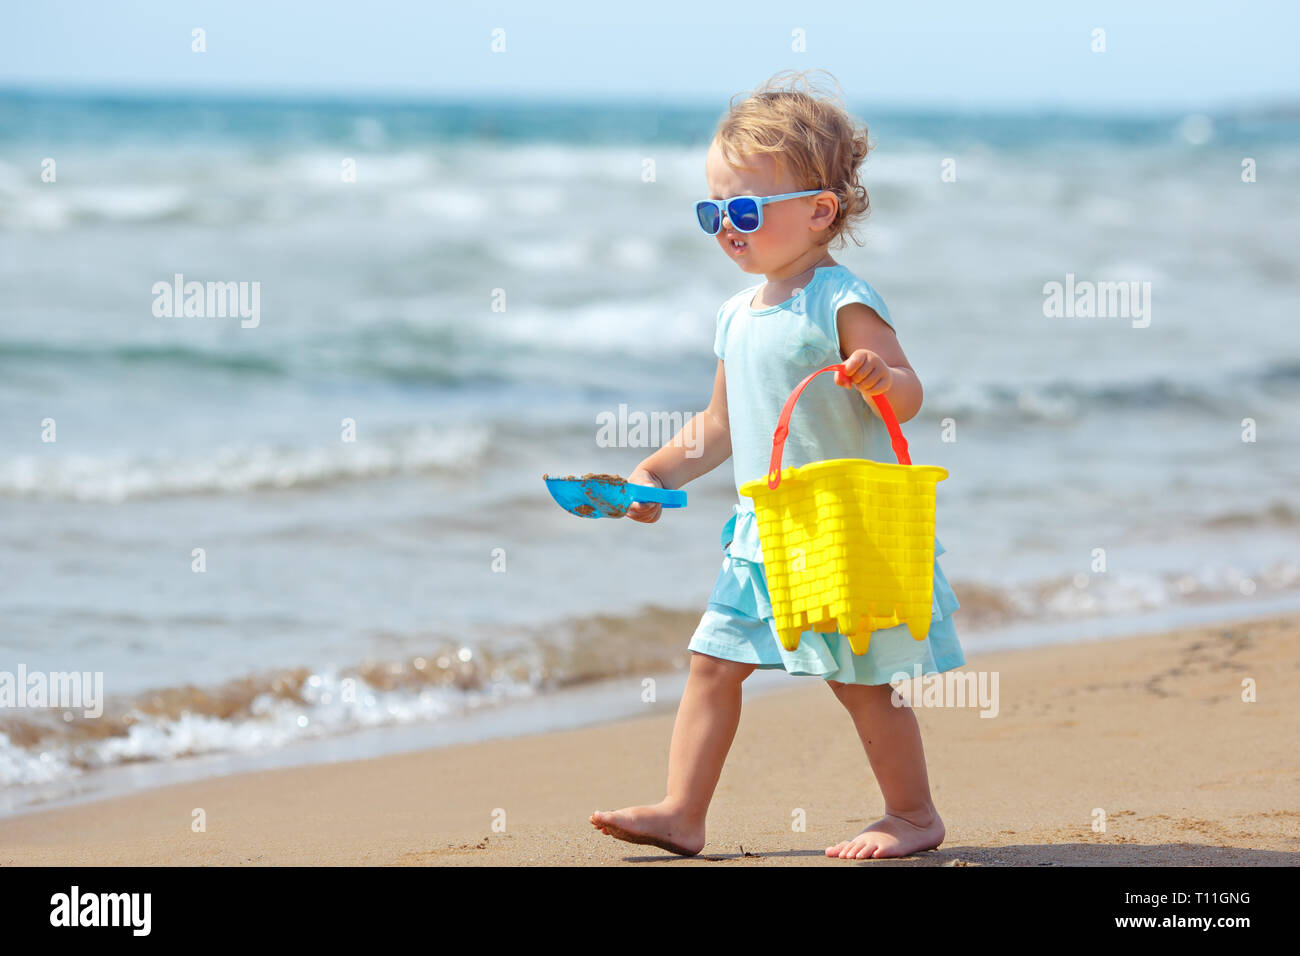 Child playing on tropical beach. Little girl digging sand at sea shore. Family summer vacation. Kids play with sand toys. Travel with young children Stock Photo